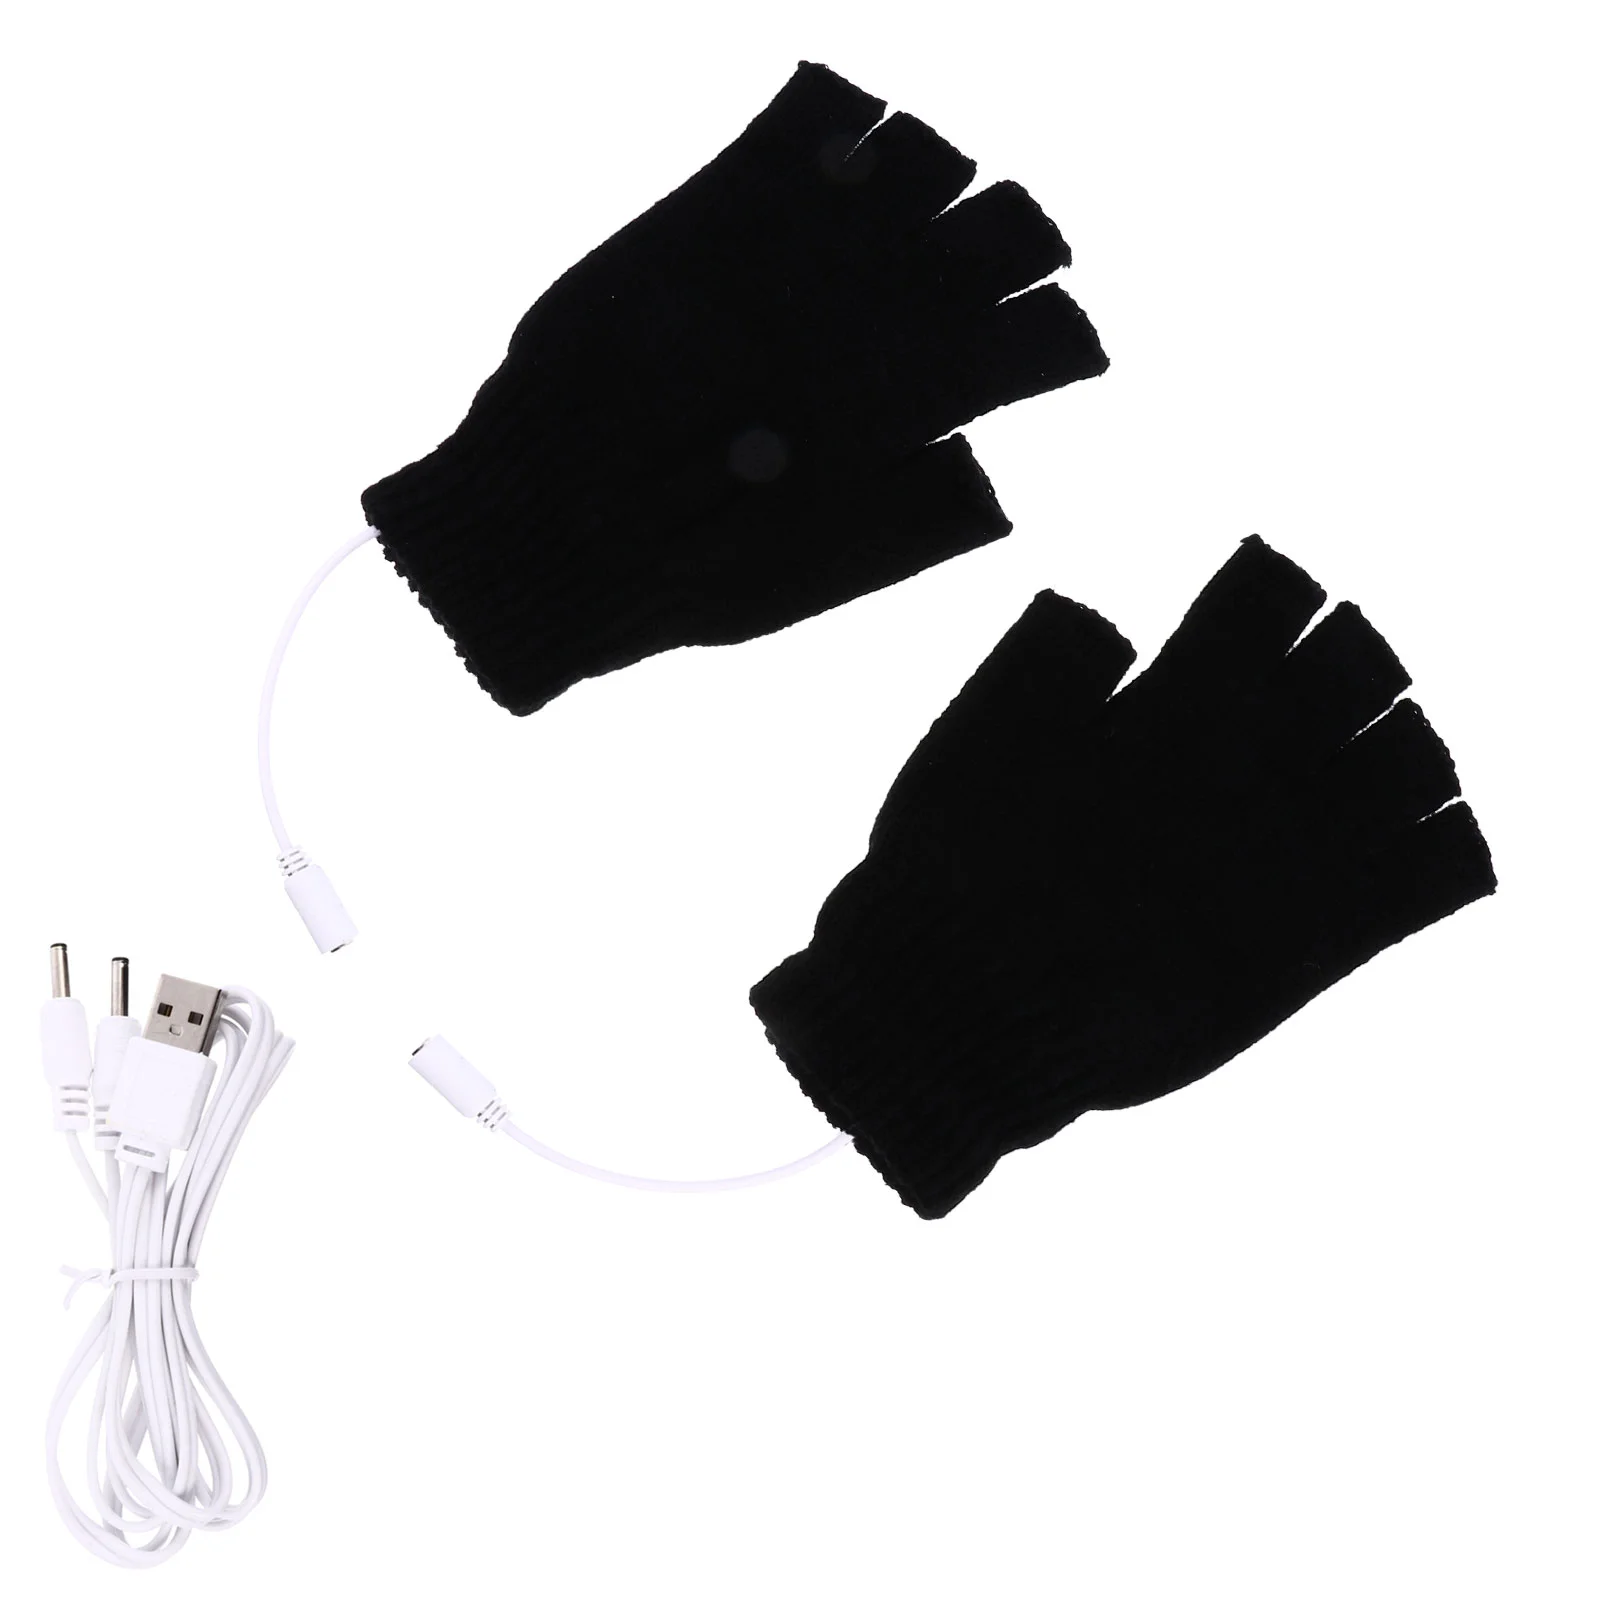 

Gloves Heated Winter Electric Heating Warmer Mitten Fingerless Hand Usb Thermal Typing Finger Half Weather Cold Hands Woolen